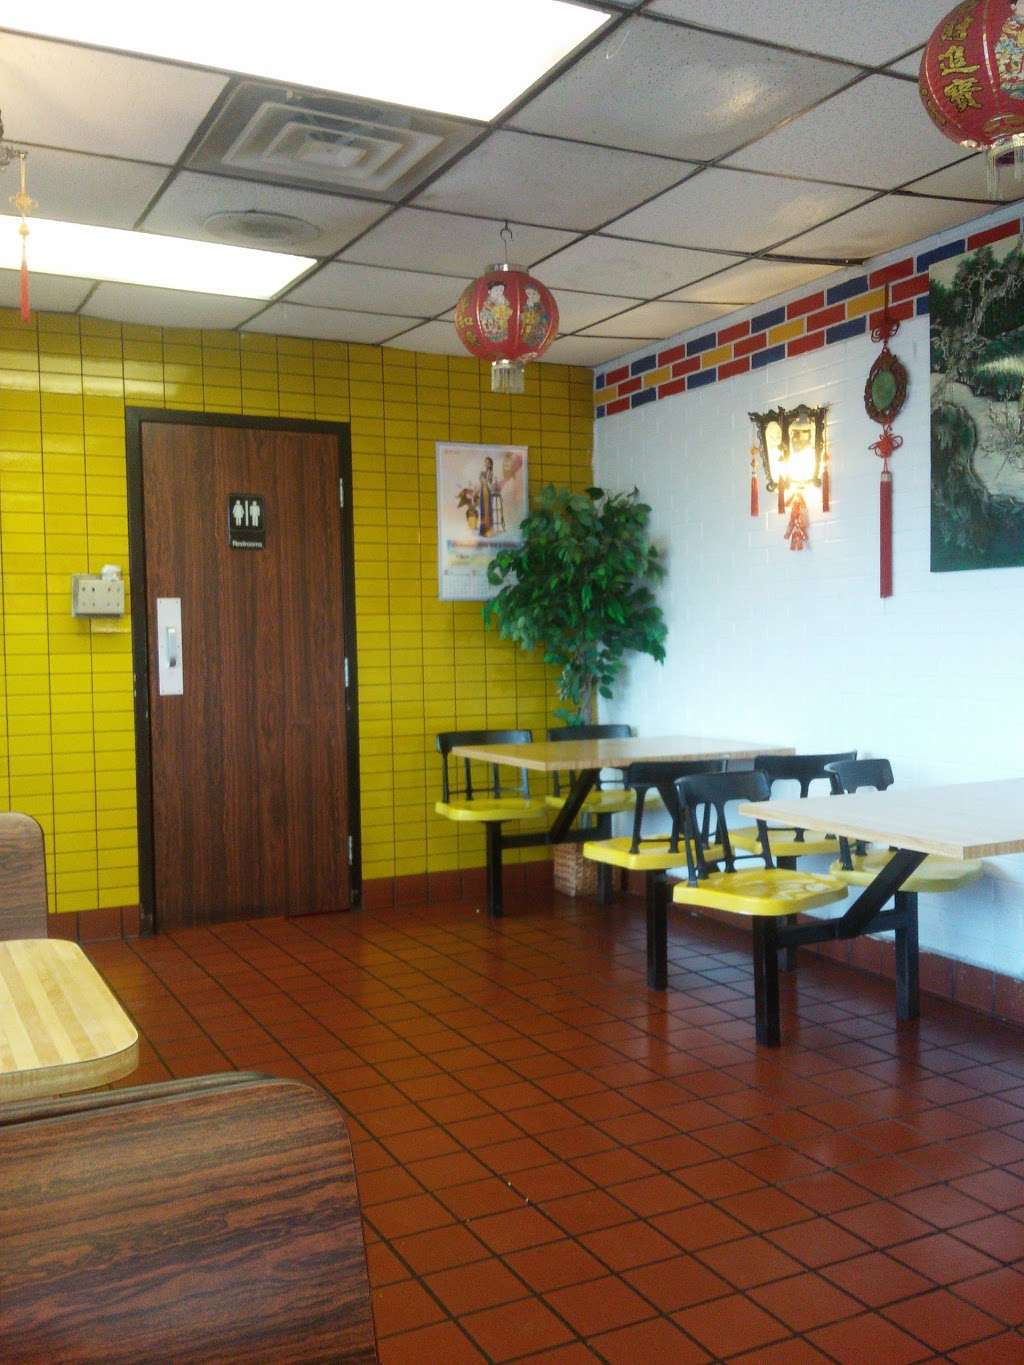 Egg Roll King | 2905 Kentucky Ave, Indianapolis, IN 46221 | Phone: (317) 243-3443